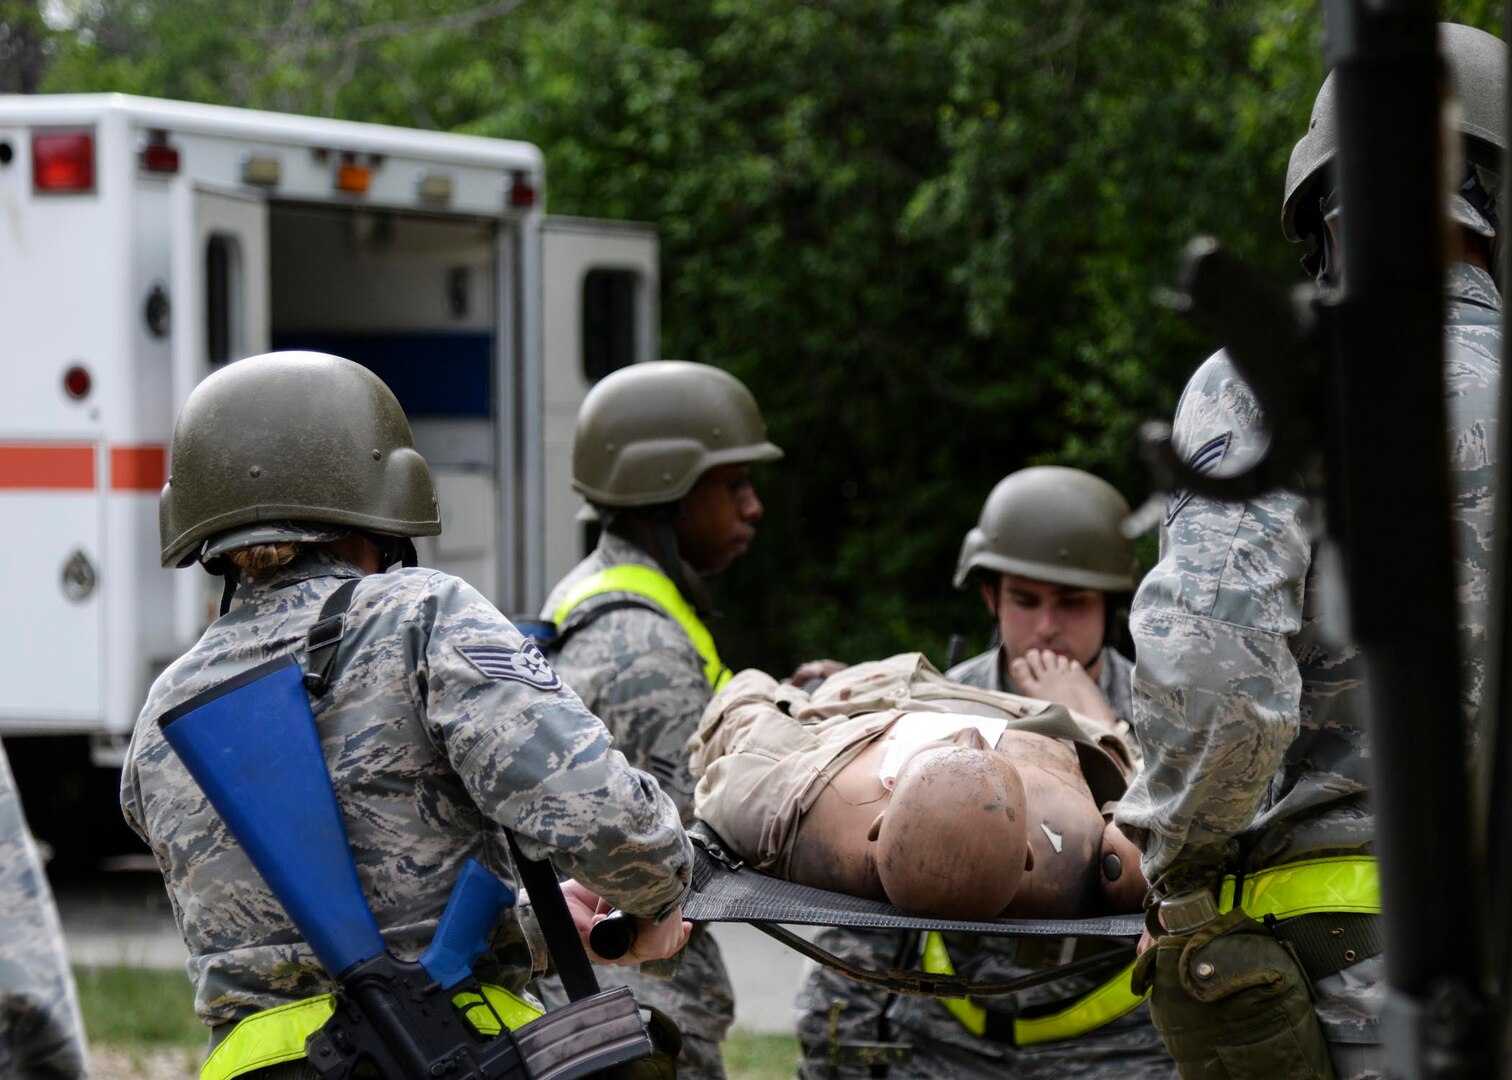 Airmen from the 59th Medical Wing transport mannequins, which simulates an injured patient, during the two-day deployment readiness training exercise July 25 at Joint Base San Antonio-Lackland, Texas. The training is required every two years, or prior to a deployment. (U.S. Air Force photo/Staff Sgt. Kevin Iinuma)